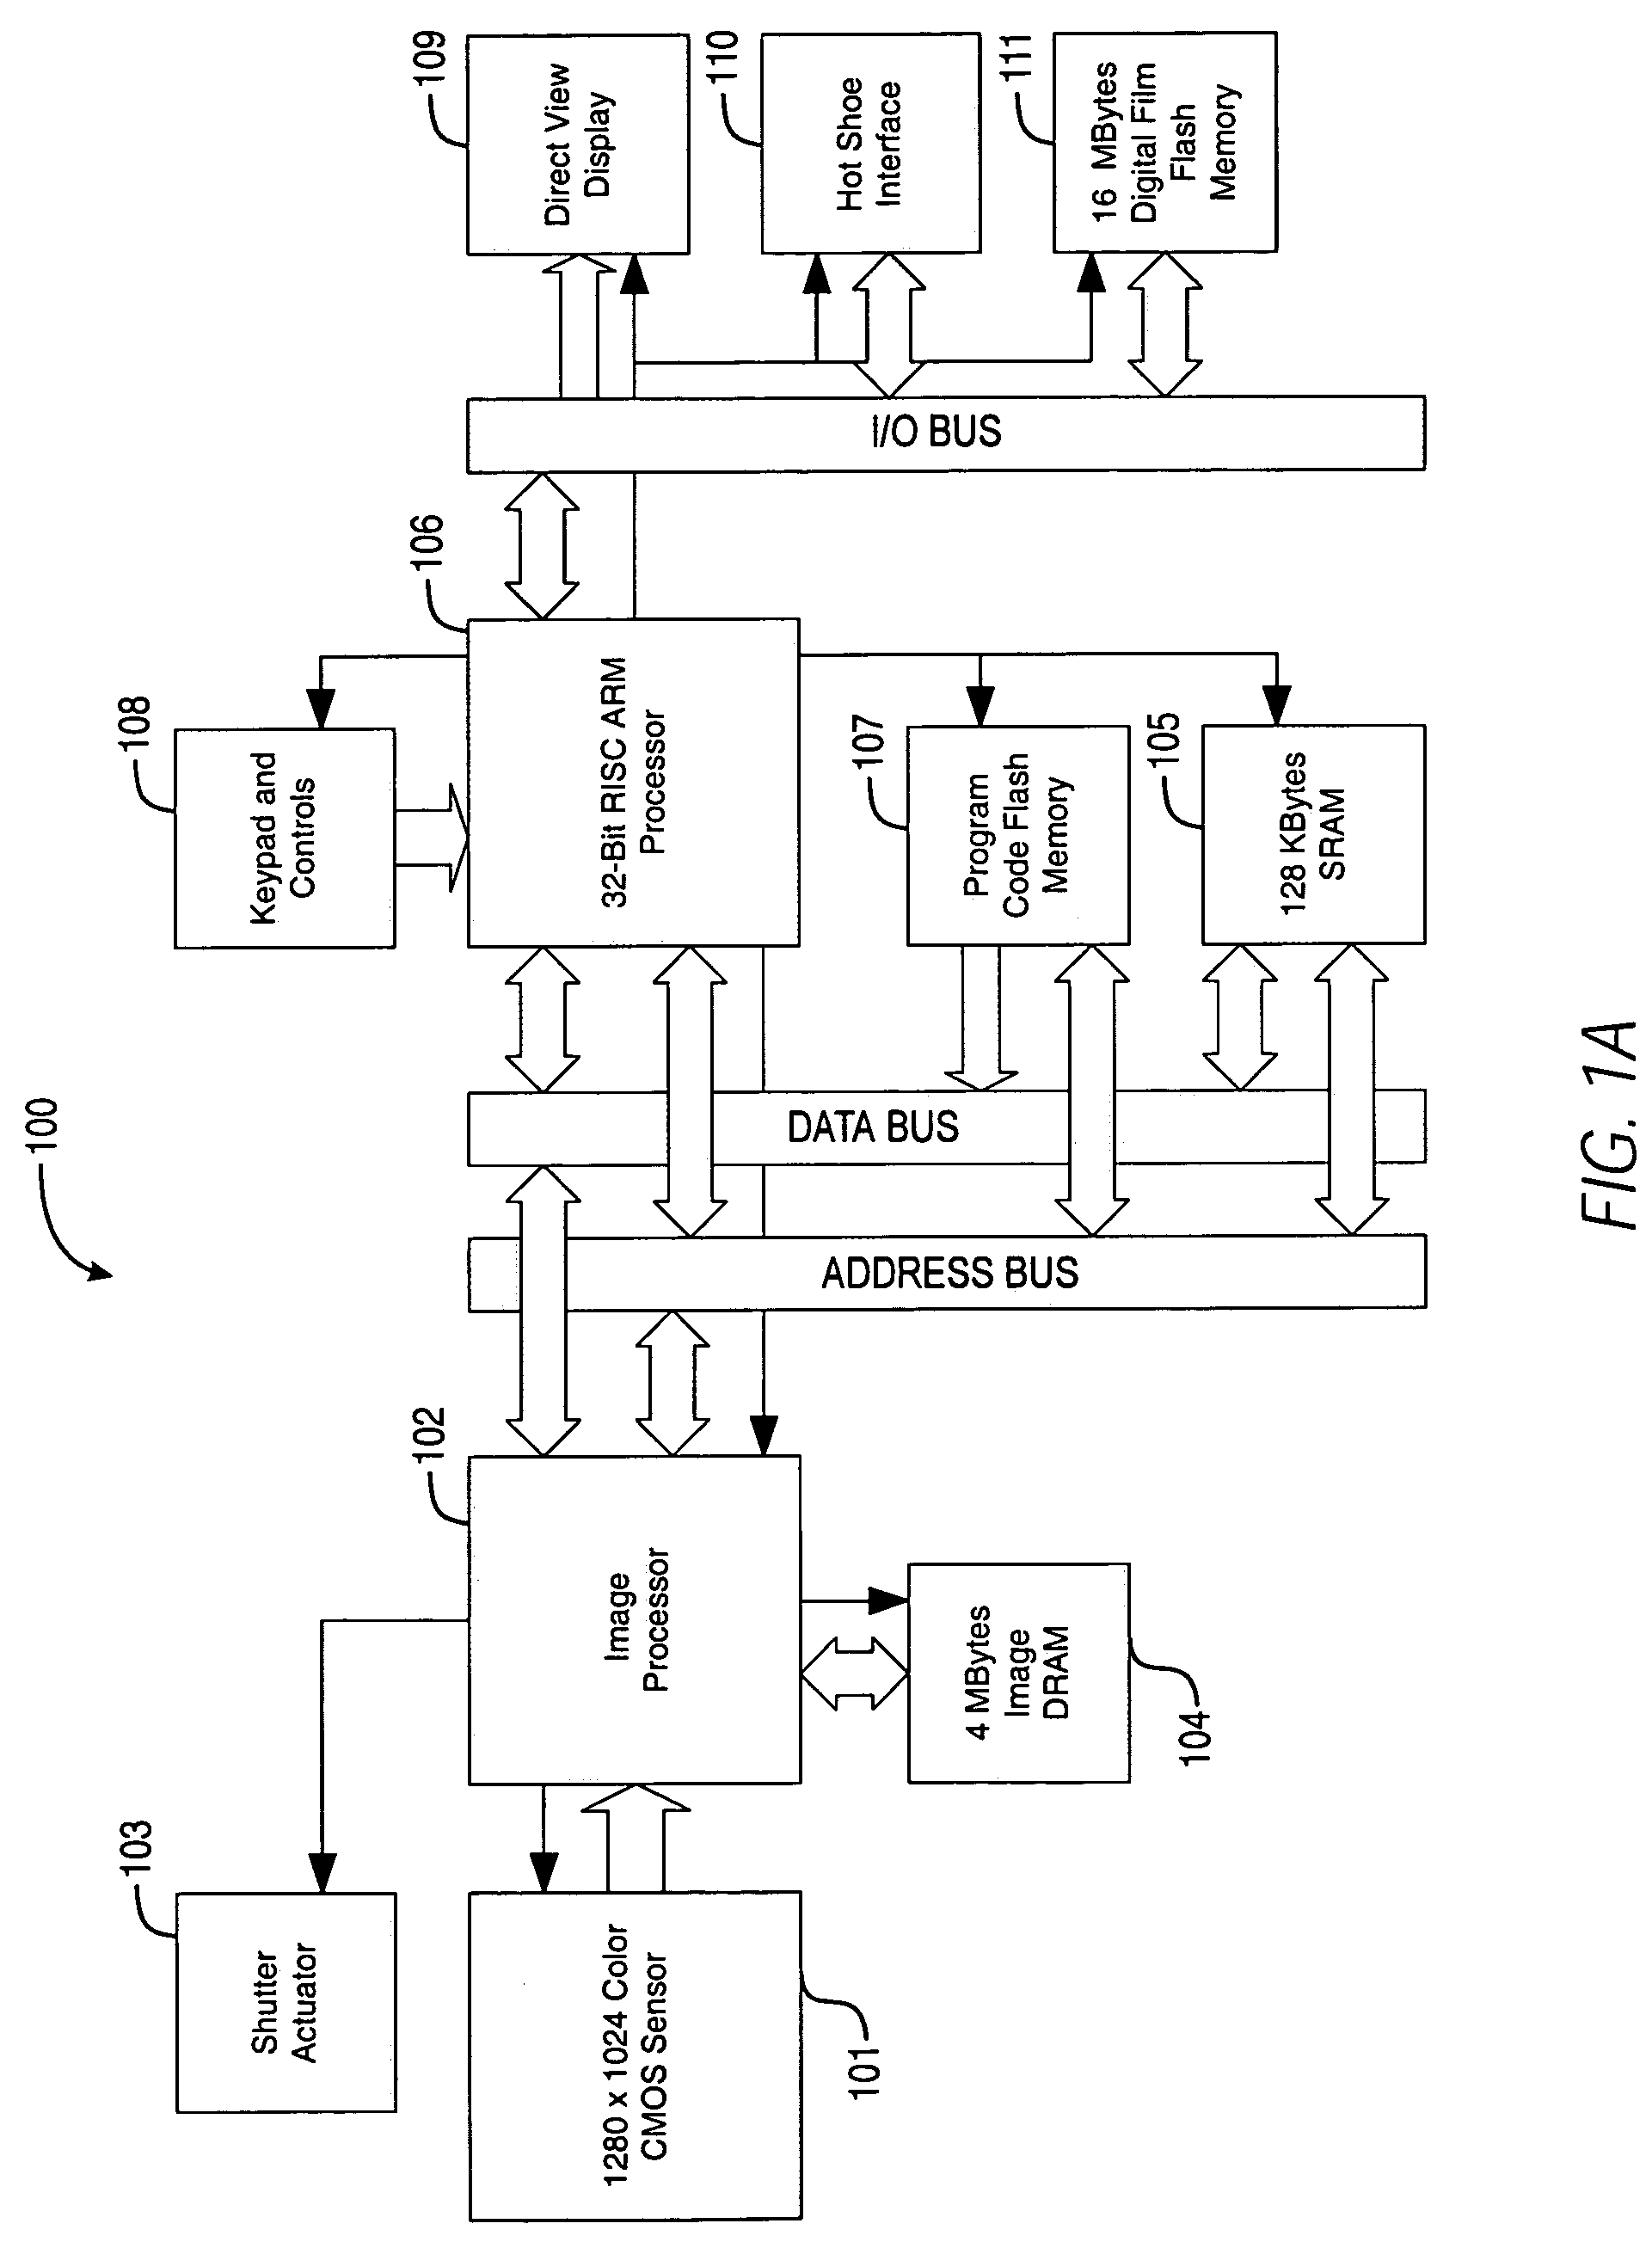 Digital camera device and methodology for distributed processing and wireless transmission of digital images